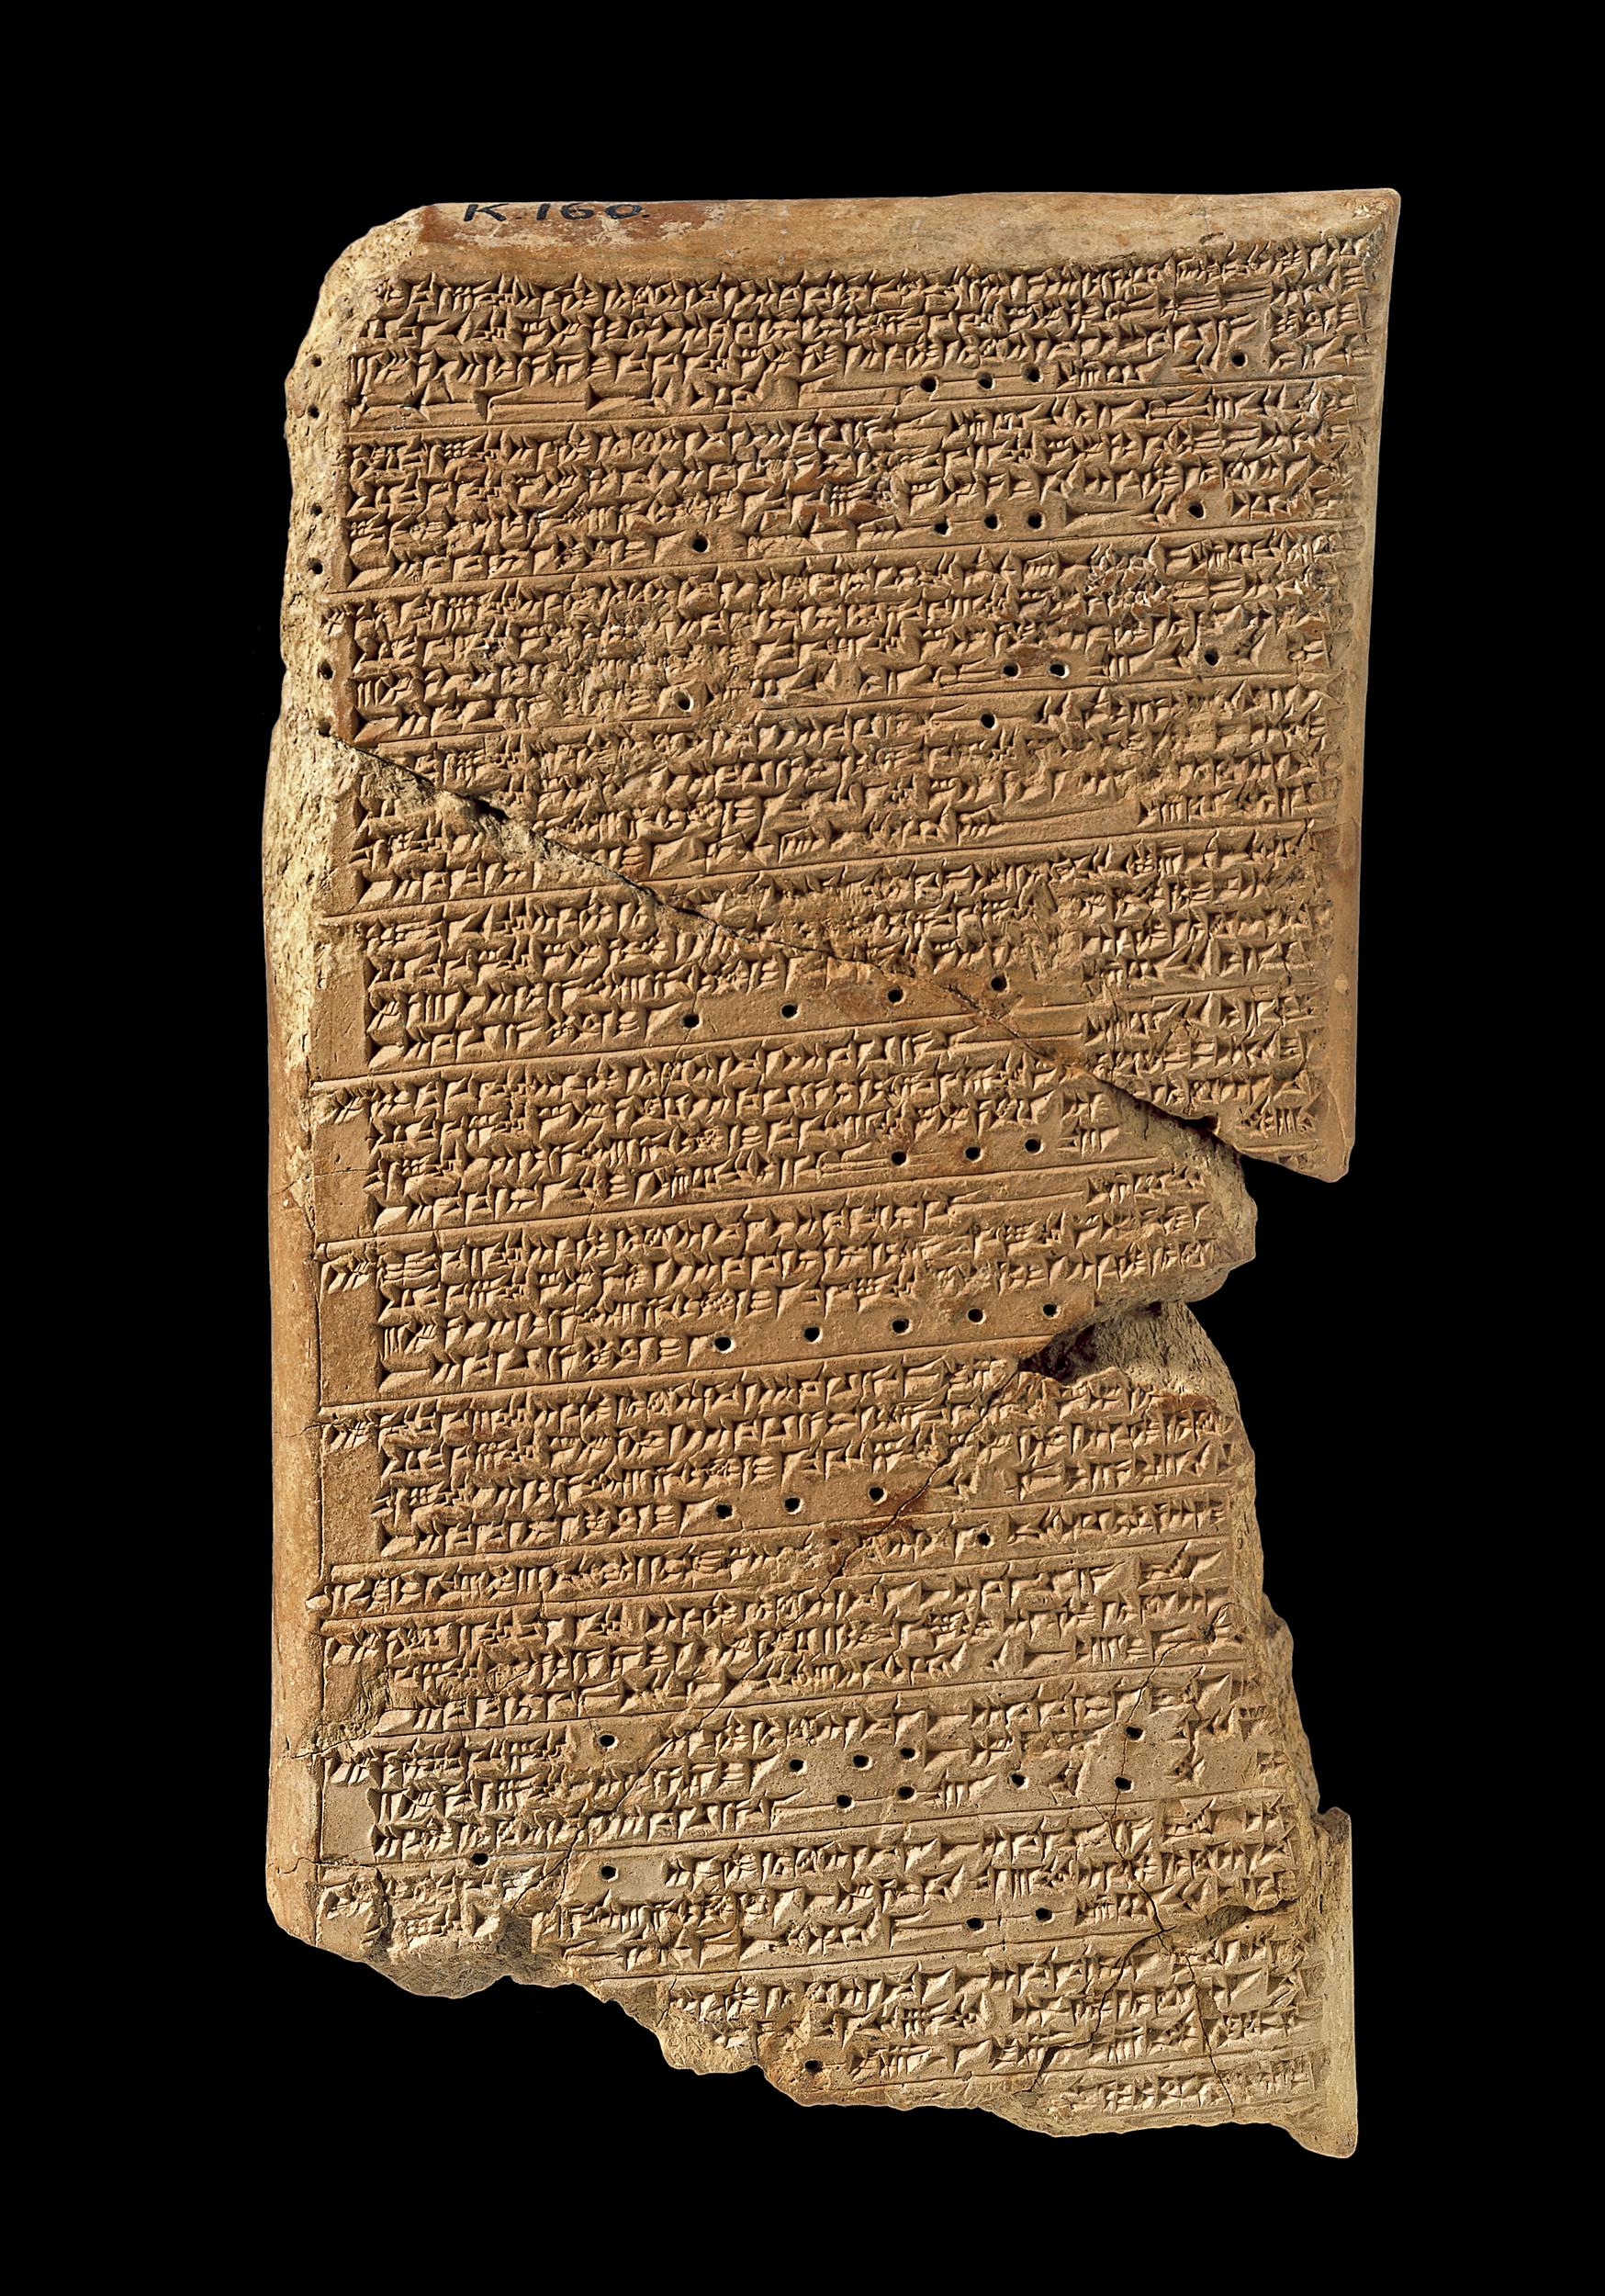 Cuneiform tablet with observations of Venus, Neo-Assyrian, 7th century B.C.E., from Nineveh, northern Iraq, clay, 17.14 x 9.20 x 2.22 cm (© Trustees of the British Museum)